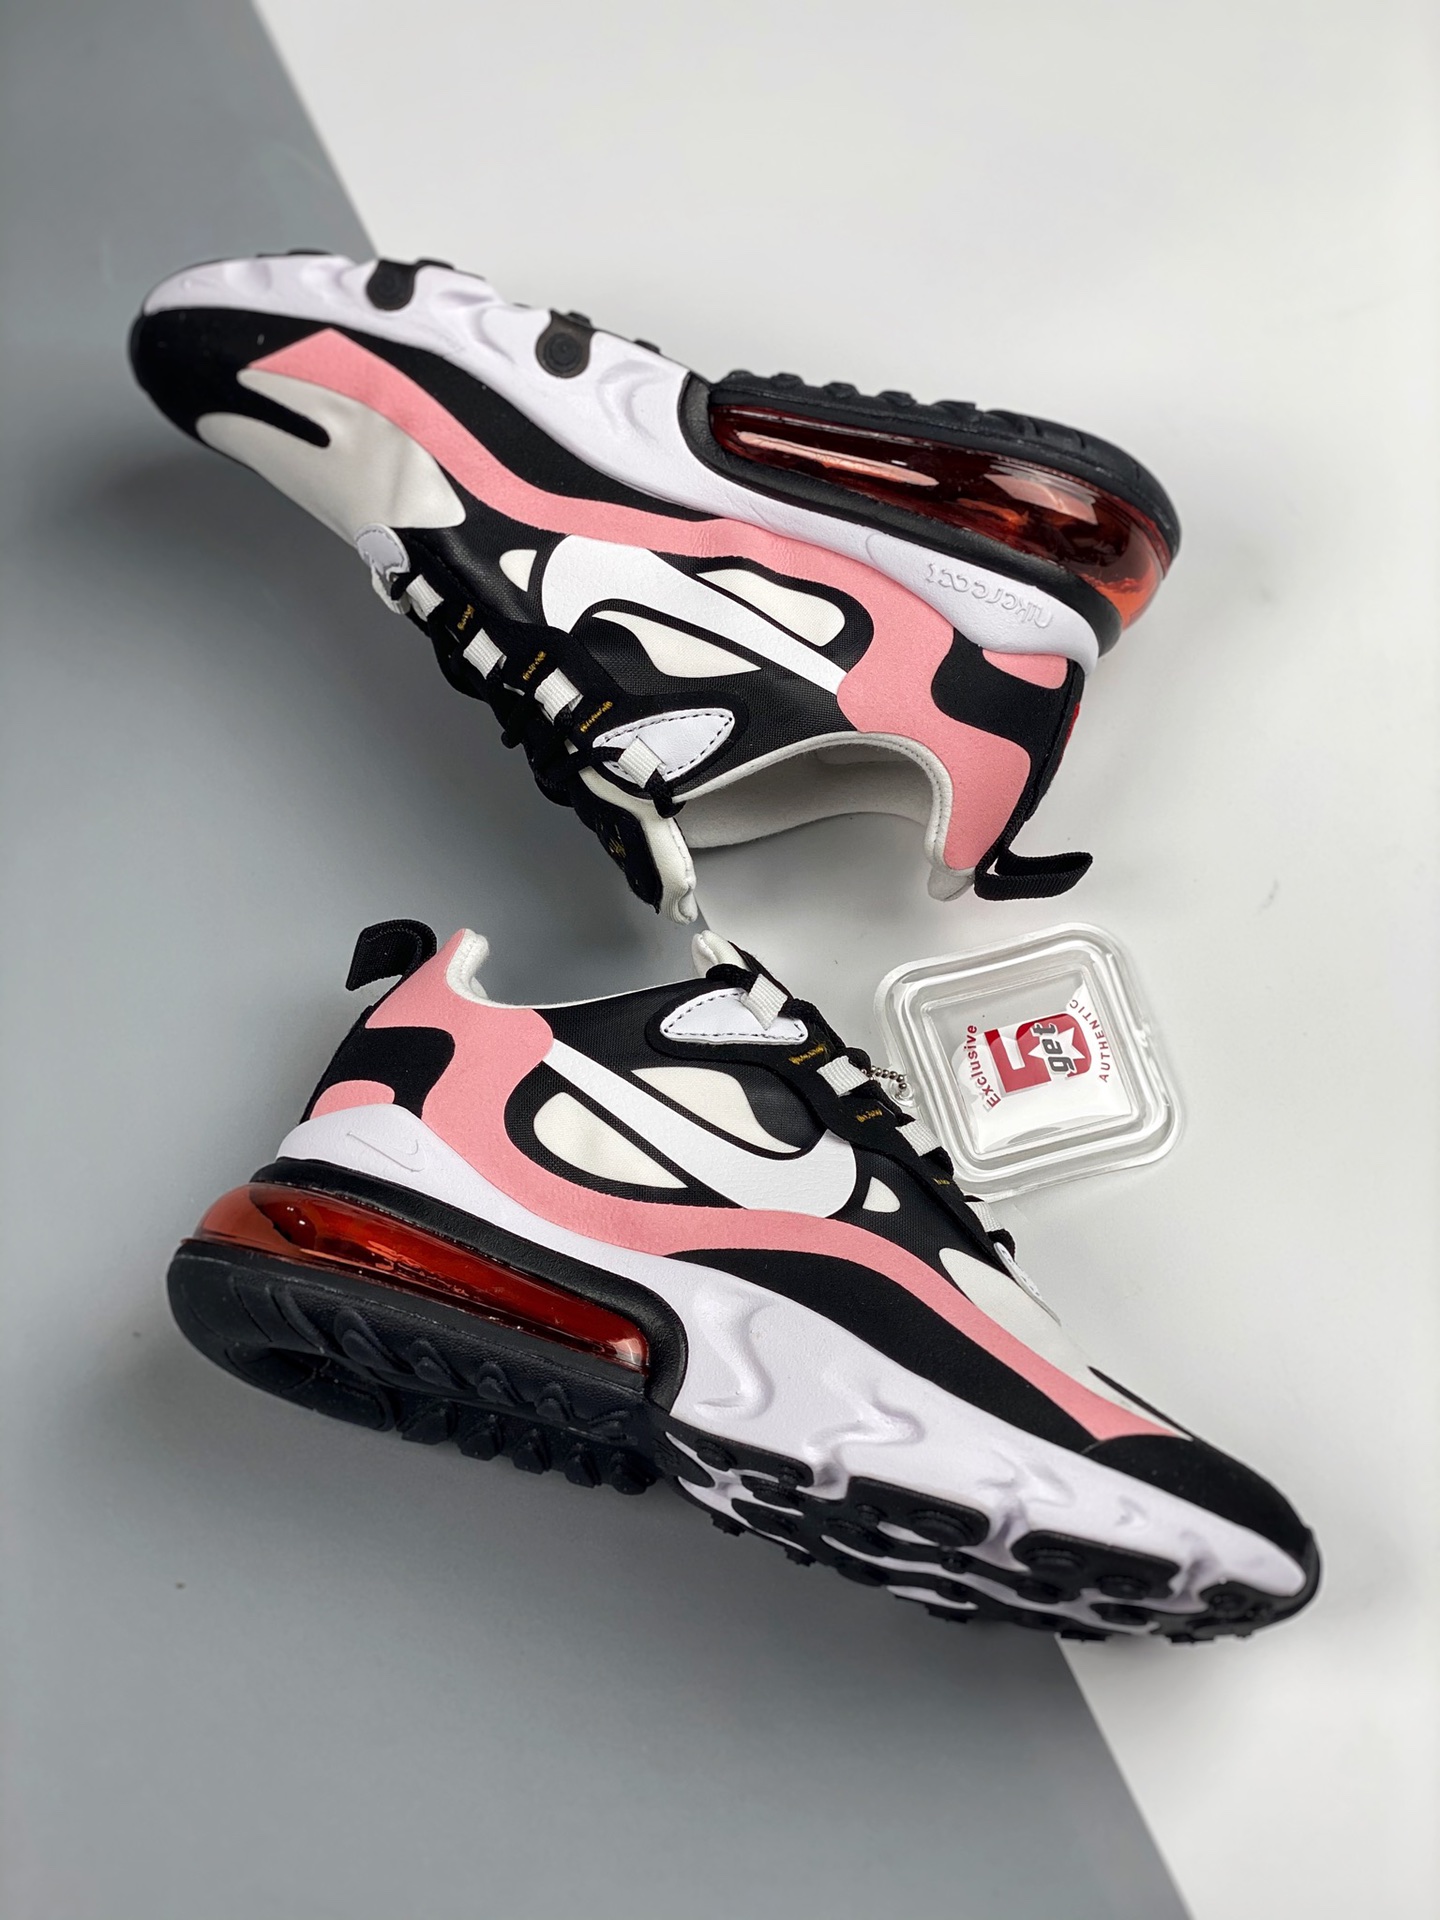 Nike Air Max 270 React Black White Bleached Coral Metallic Gold For Sale Sneaker Hello